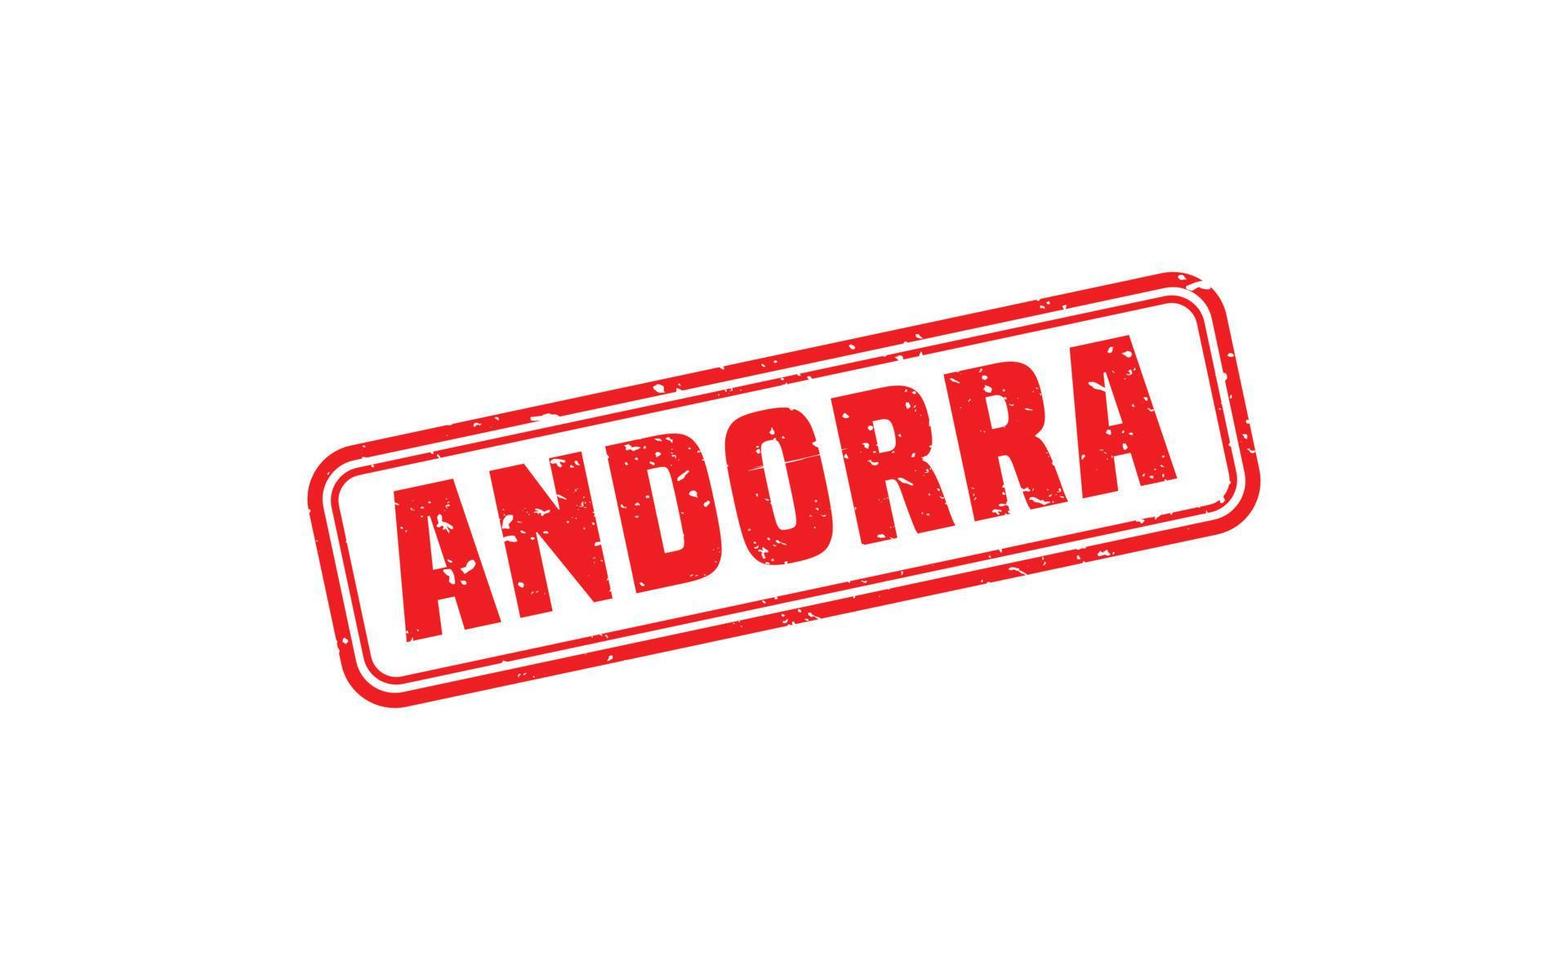 ANDORRA stamp rubber with grunge style on white background vector